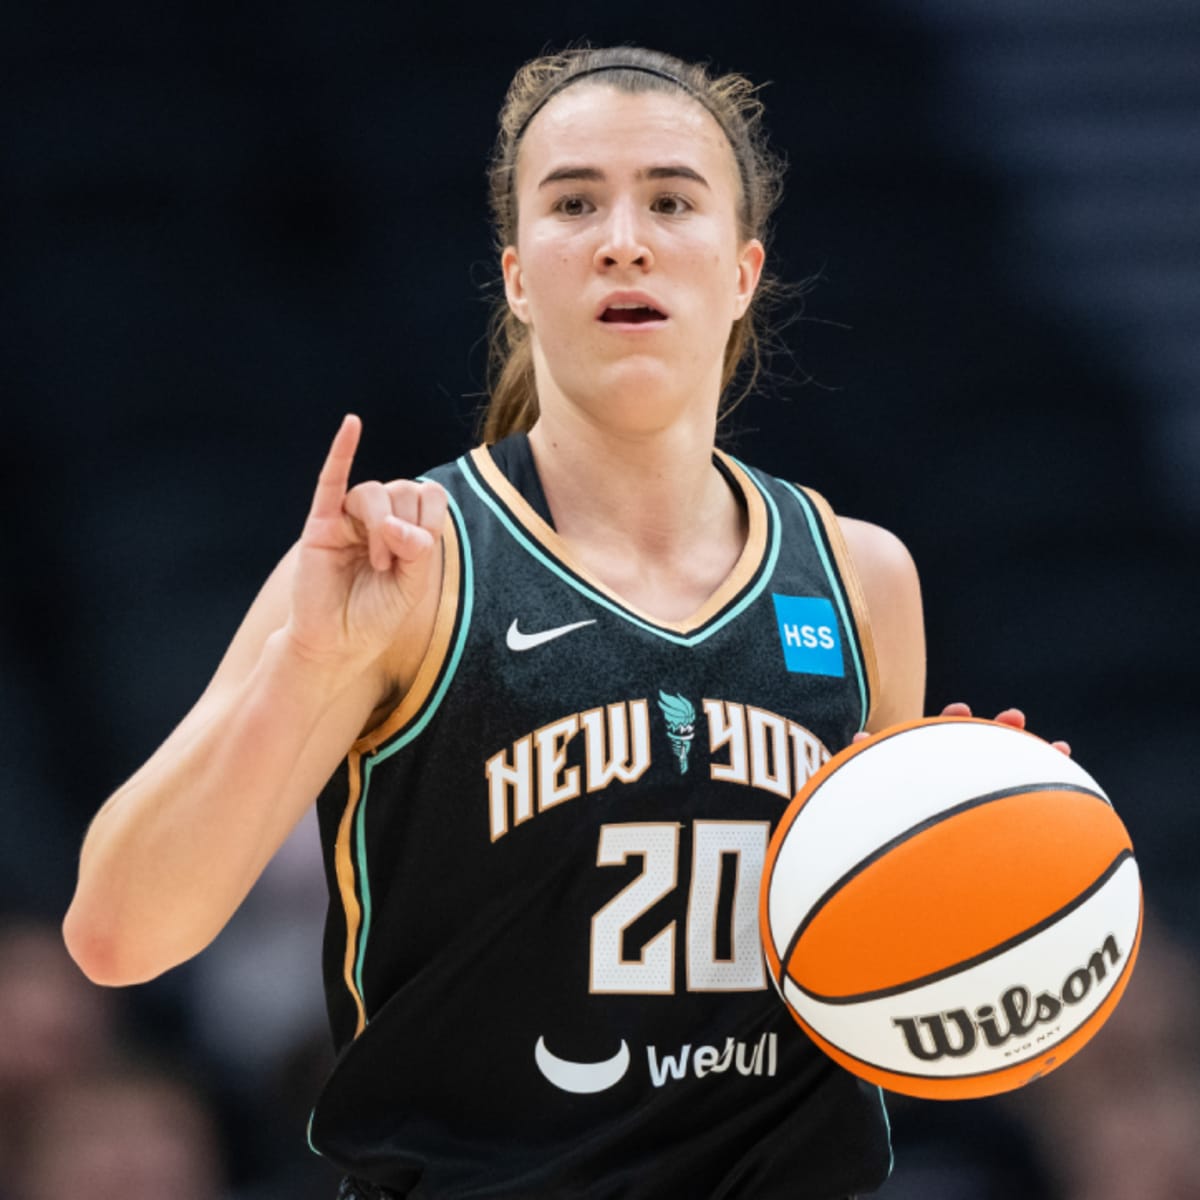 After Sabrina Ionescu's historical performance, the WNBA has still